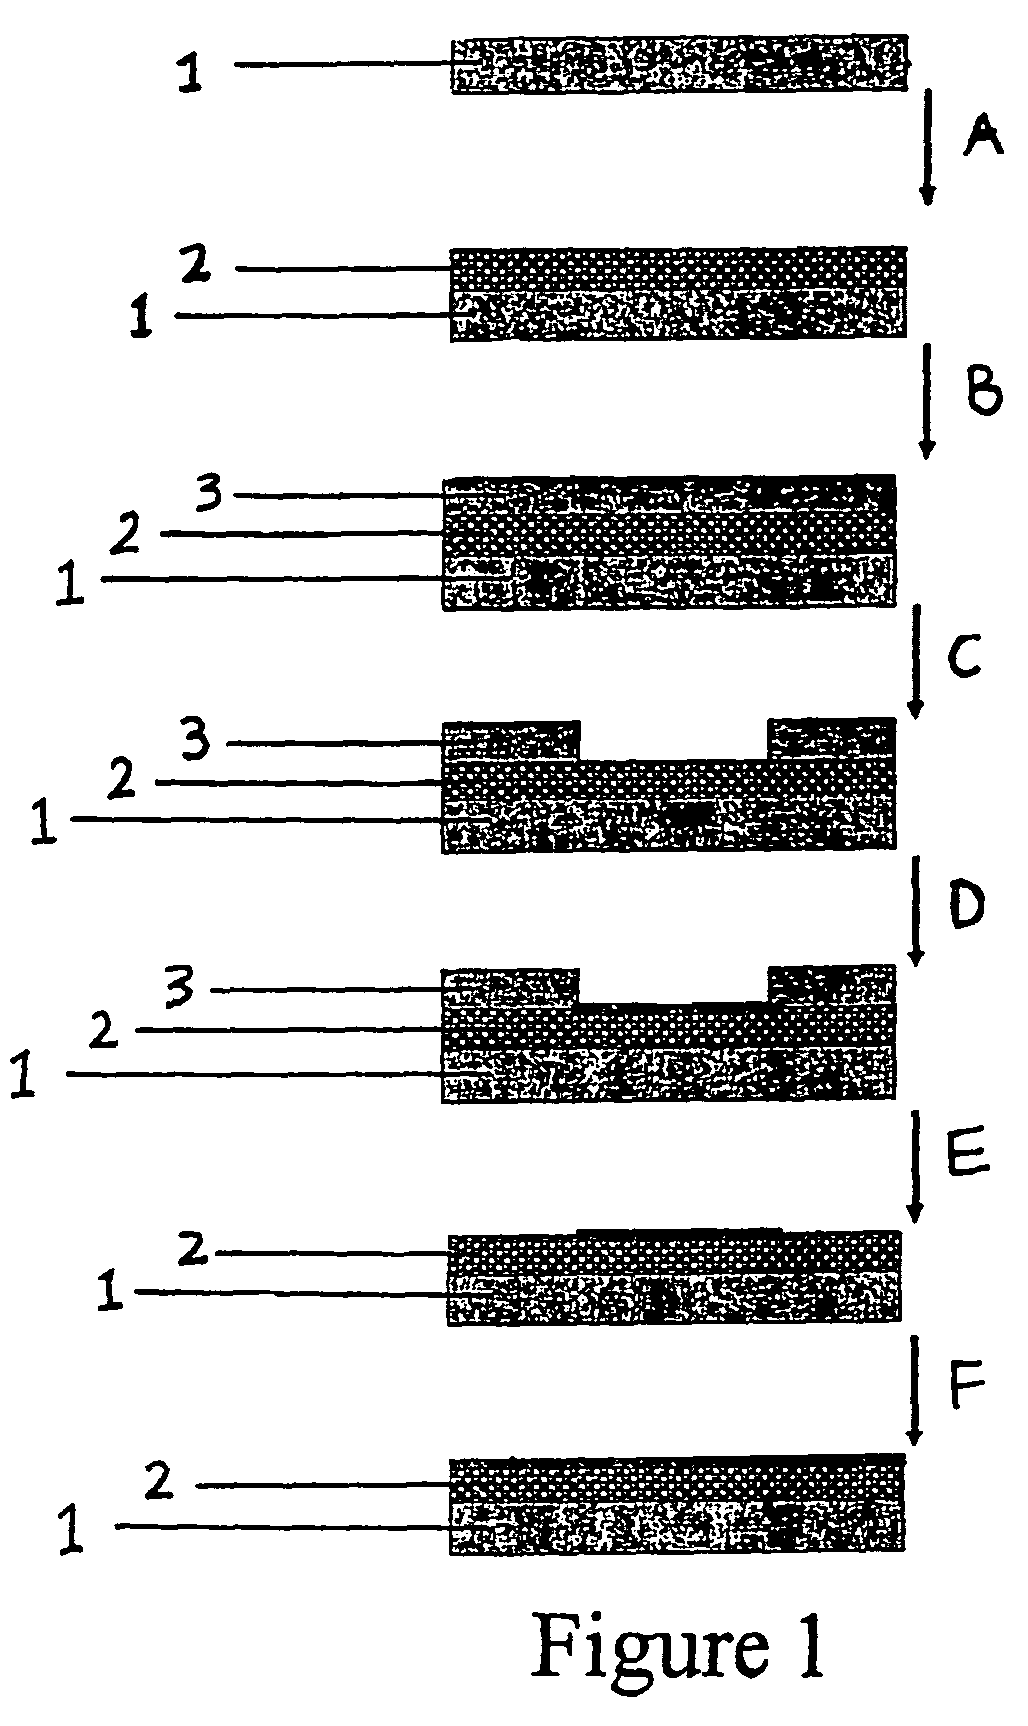 Method of producing a substrate having areas of different hydrophilicity and/or oleophilicity on the same surface